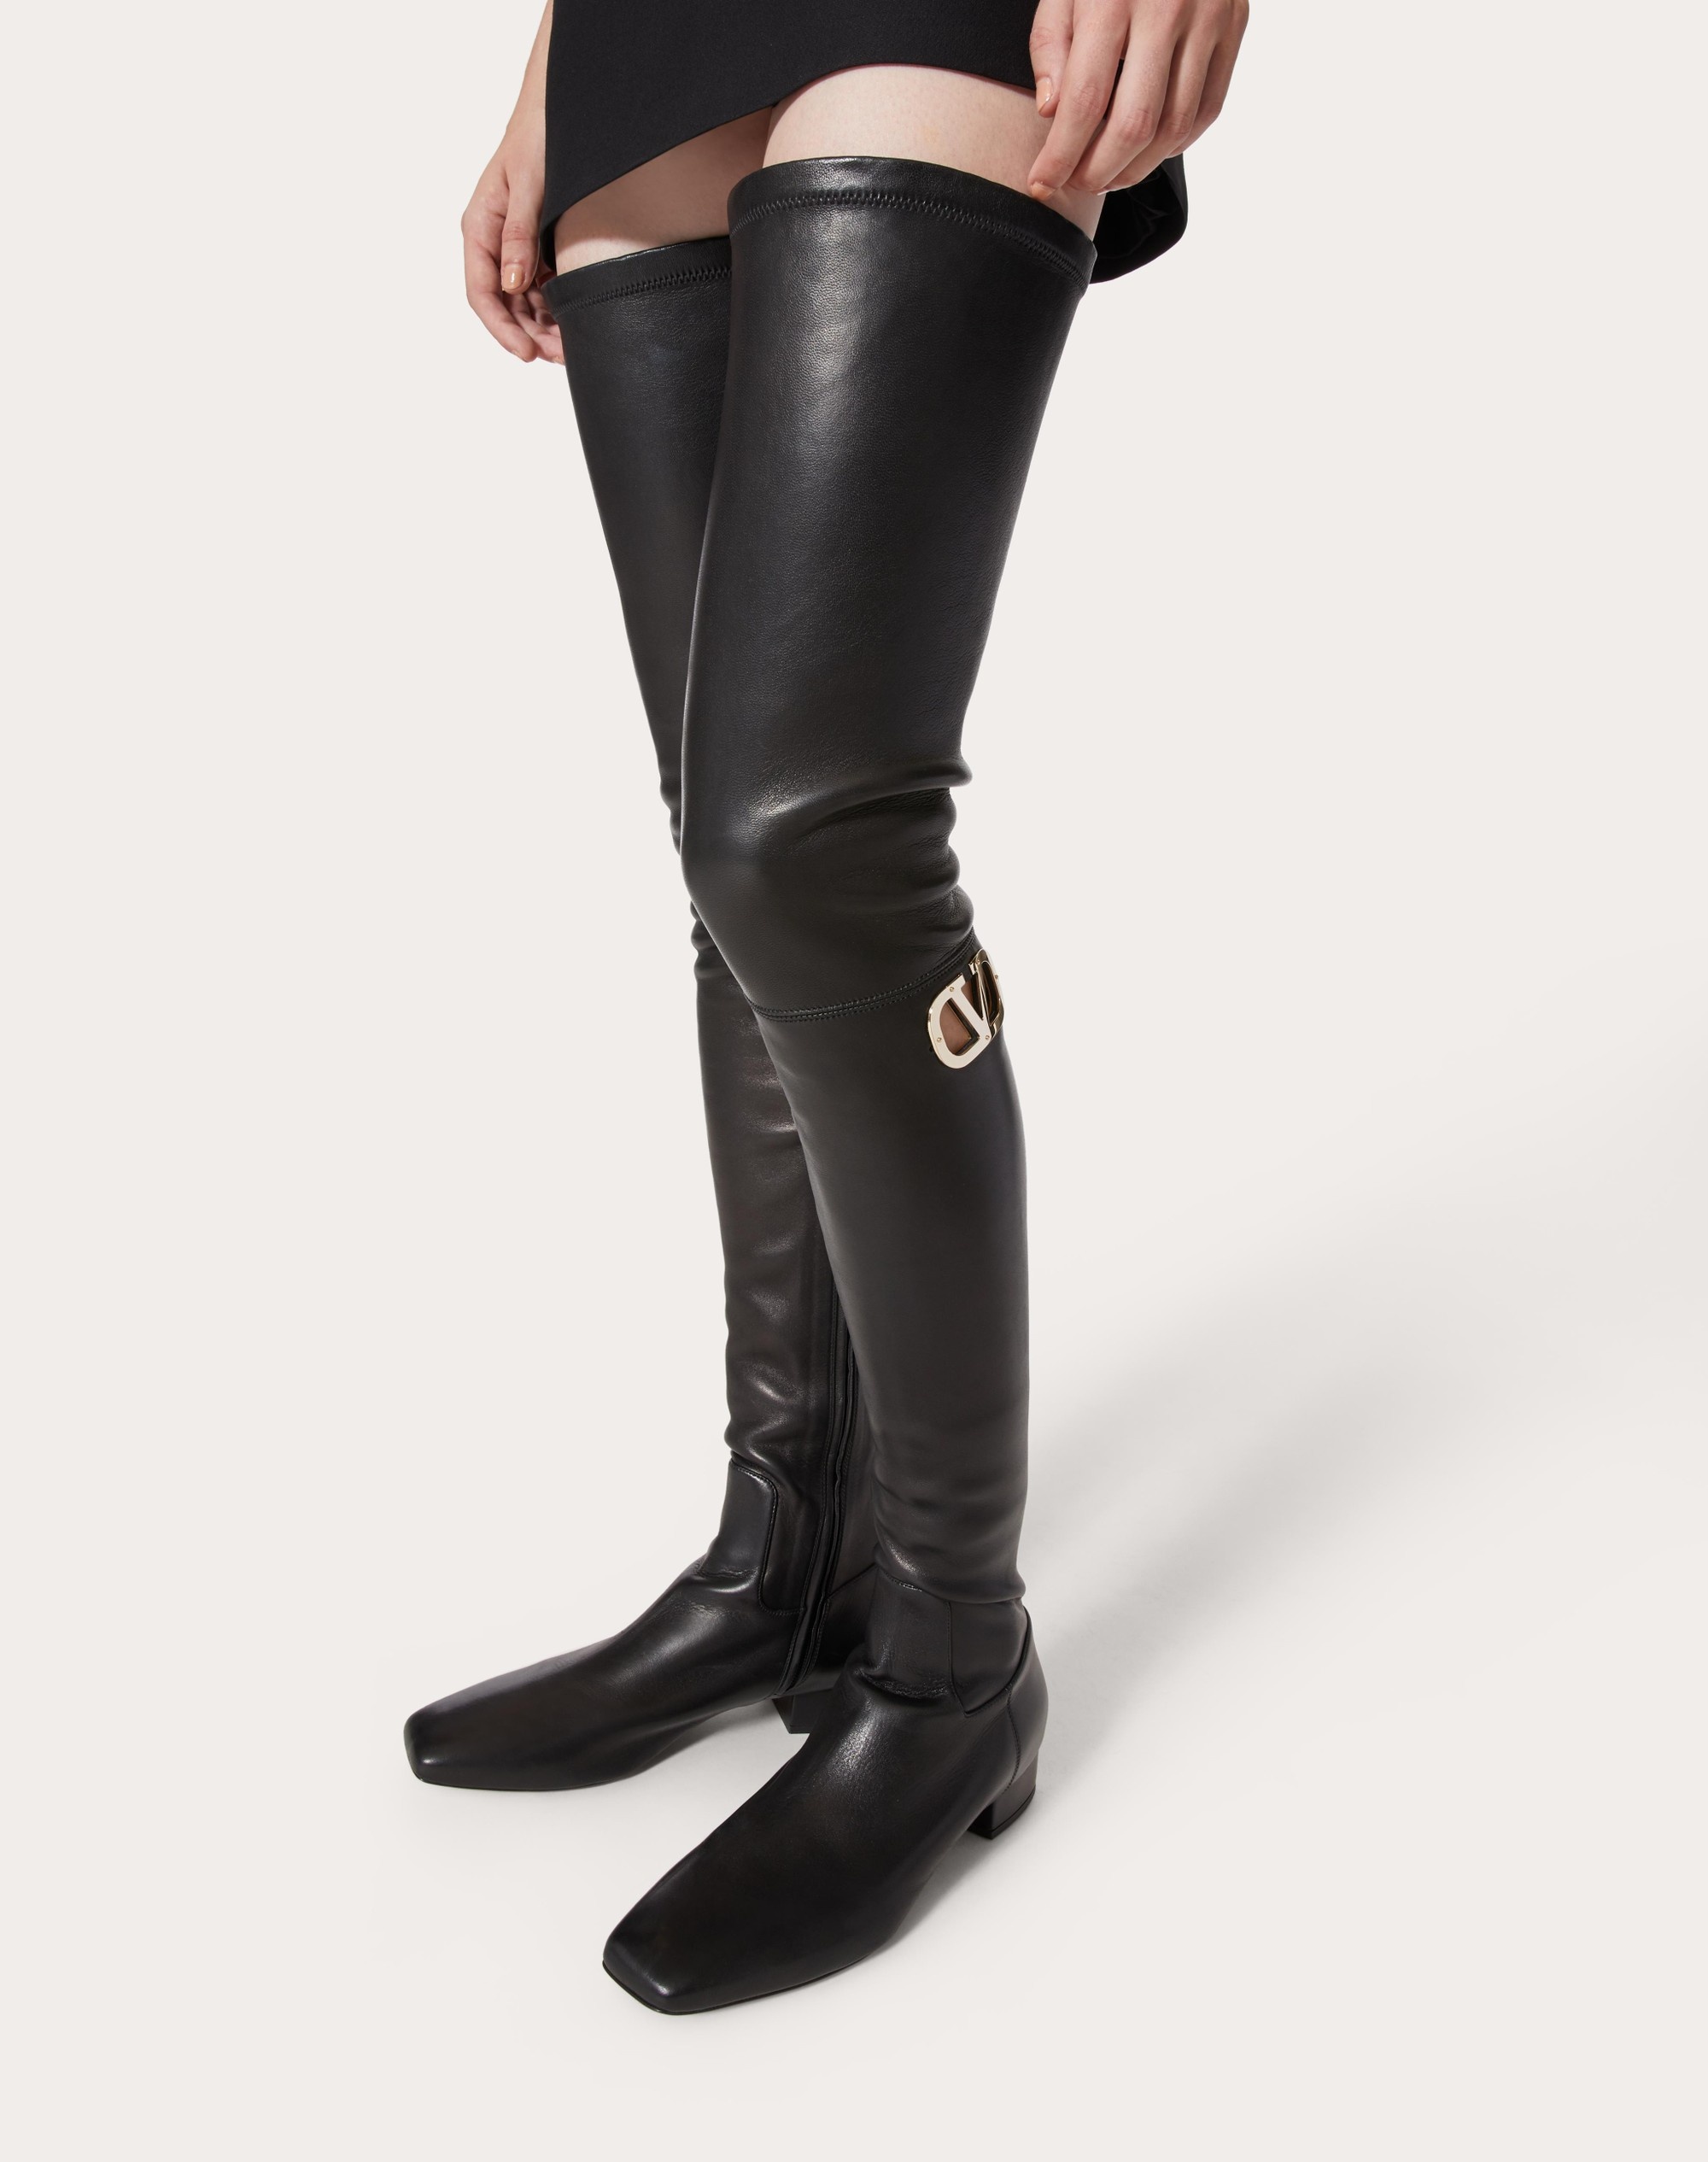 VLOGO TYPE OVER-THE-KNEE BOOT IN STRETCH NAPPA 30MM - 6